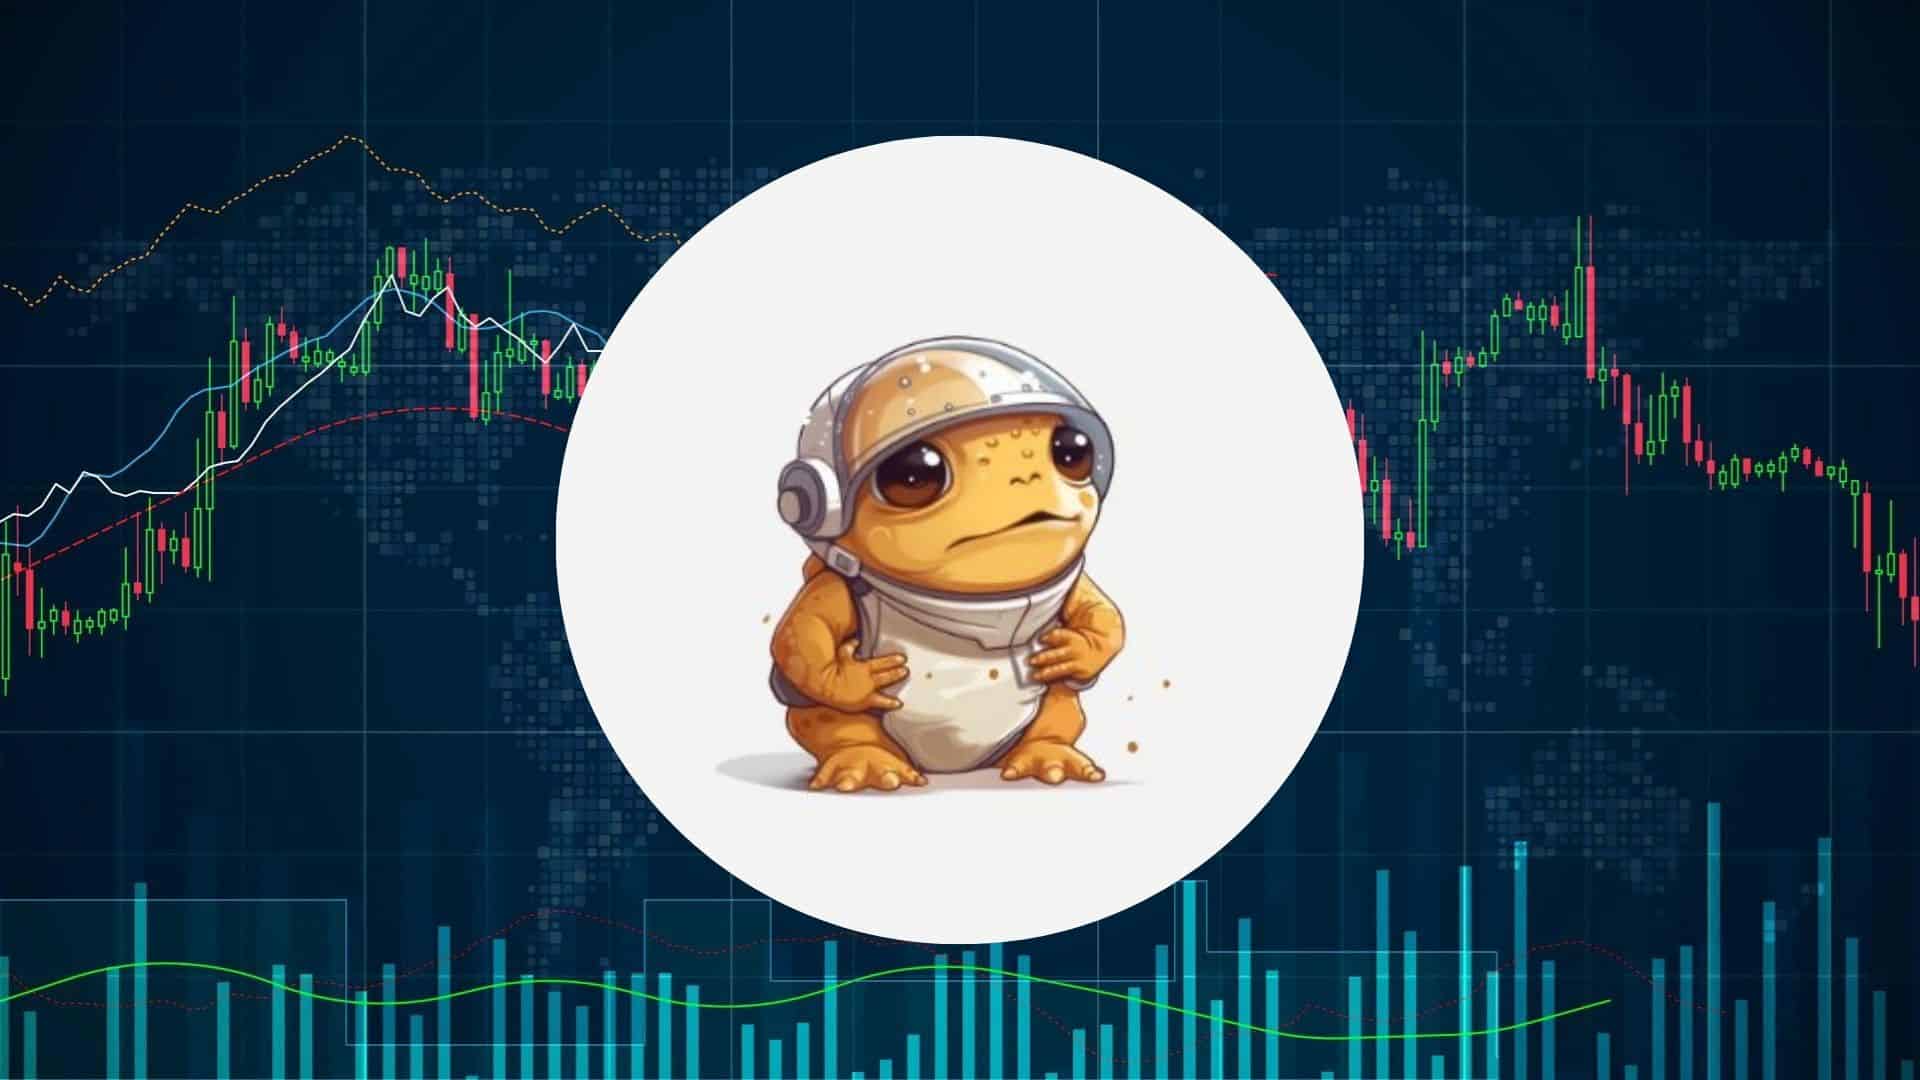 Turbo Price Prediction: TURBO Plummets 12% As Traders Rush To Buy This Blockbuster AI Meme Coin ICO With Only 7 Days Left